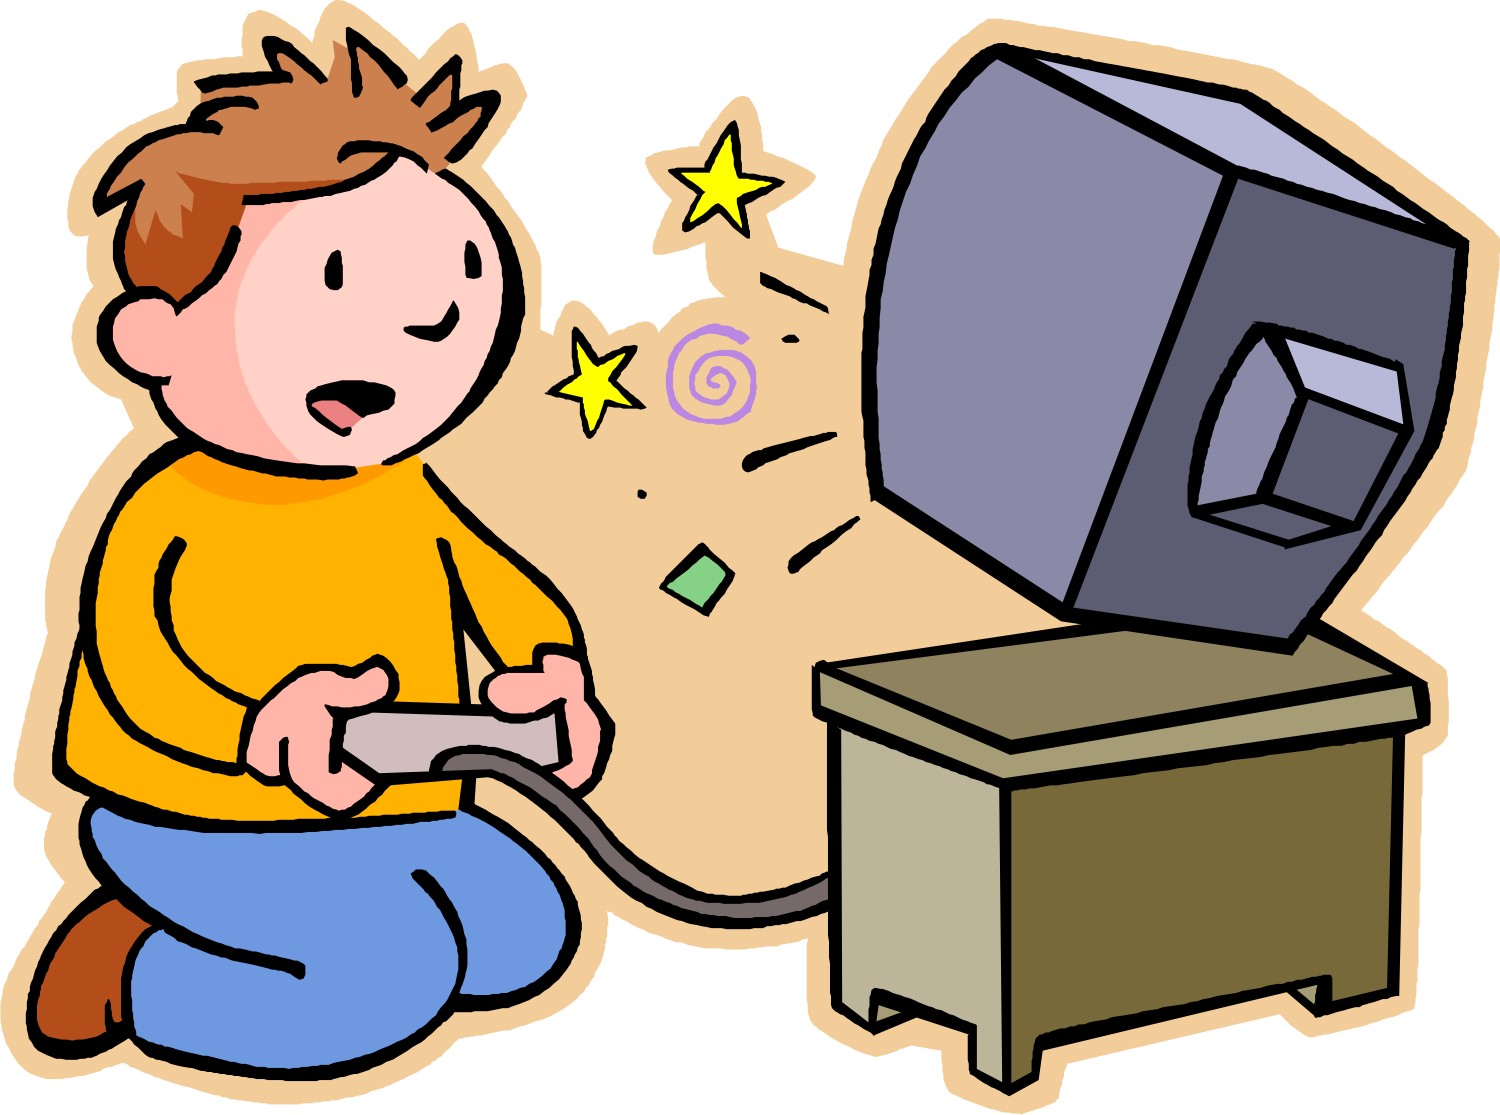 Play game clipart